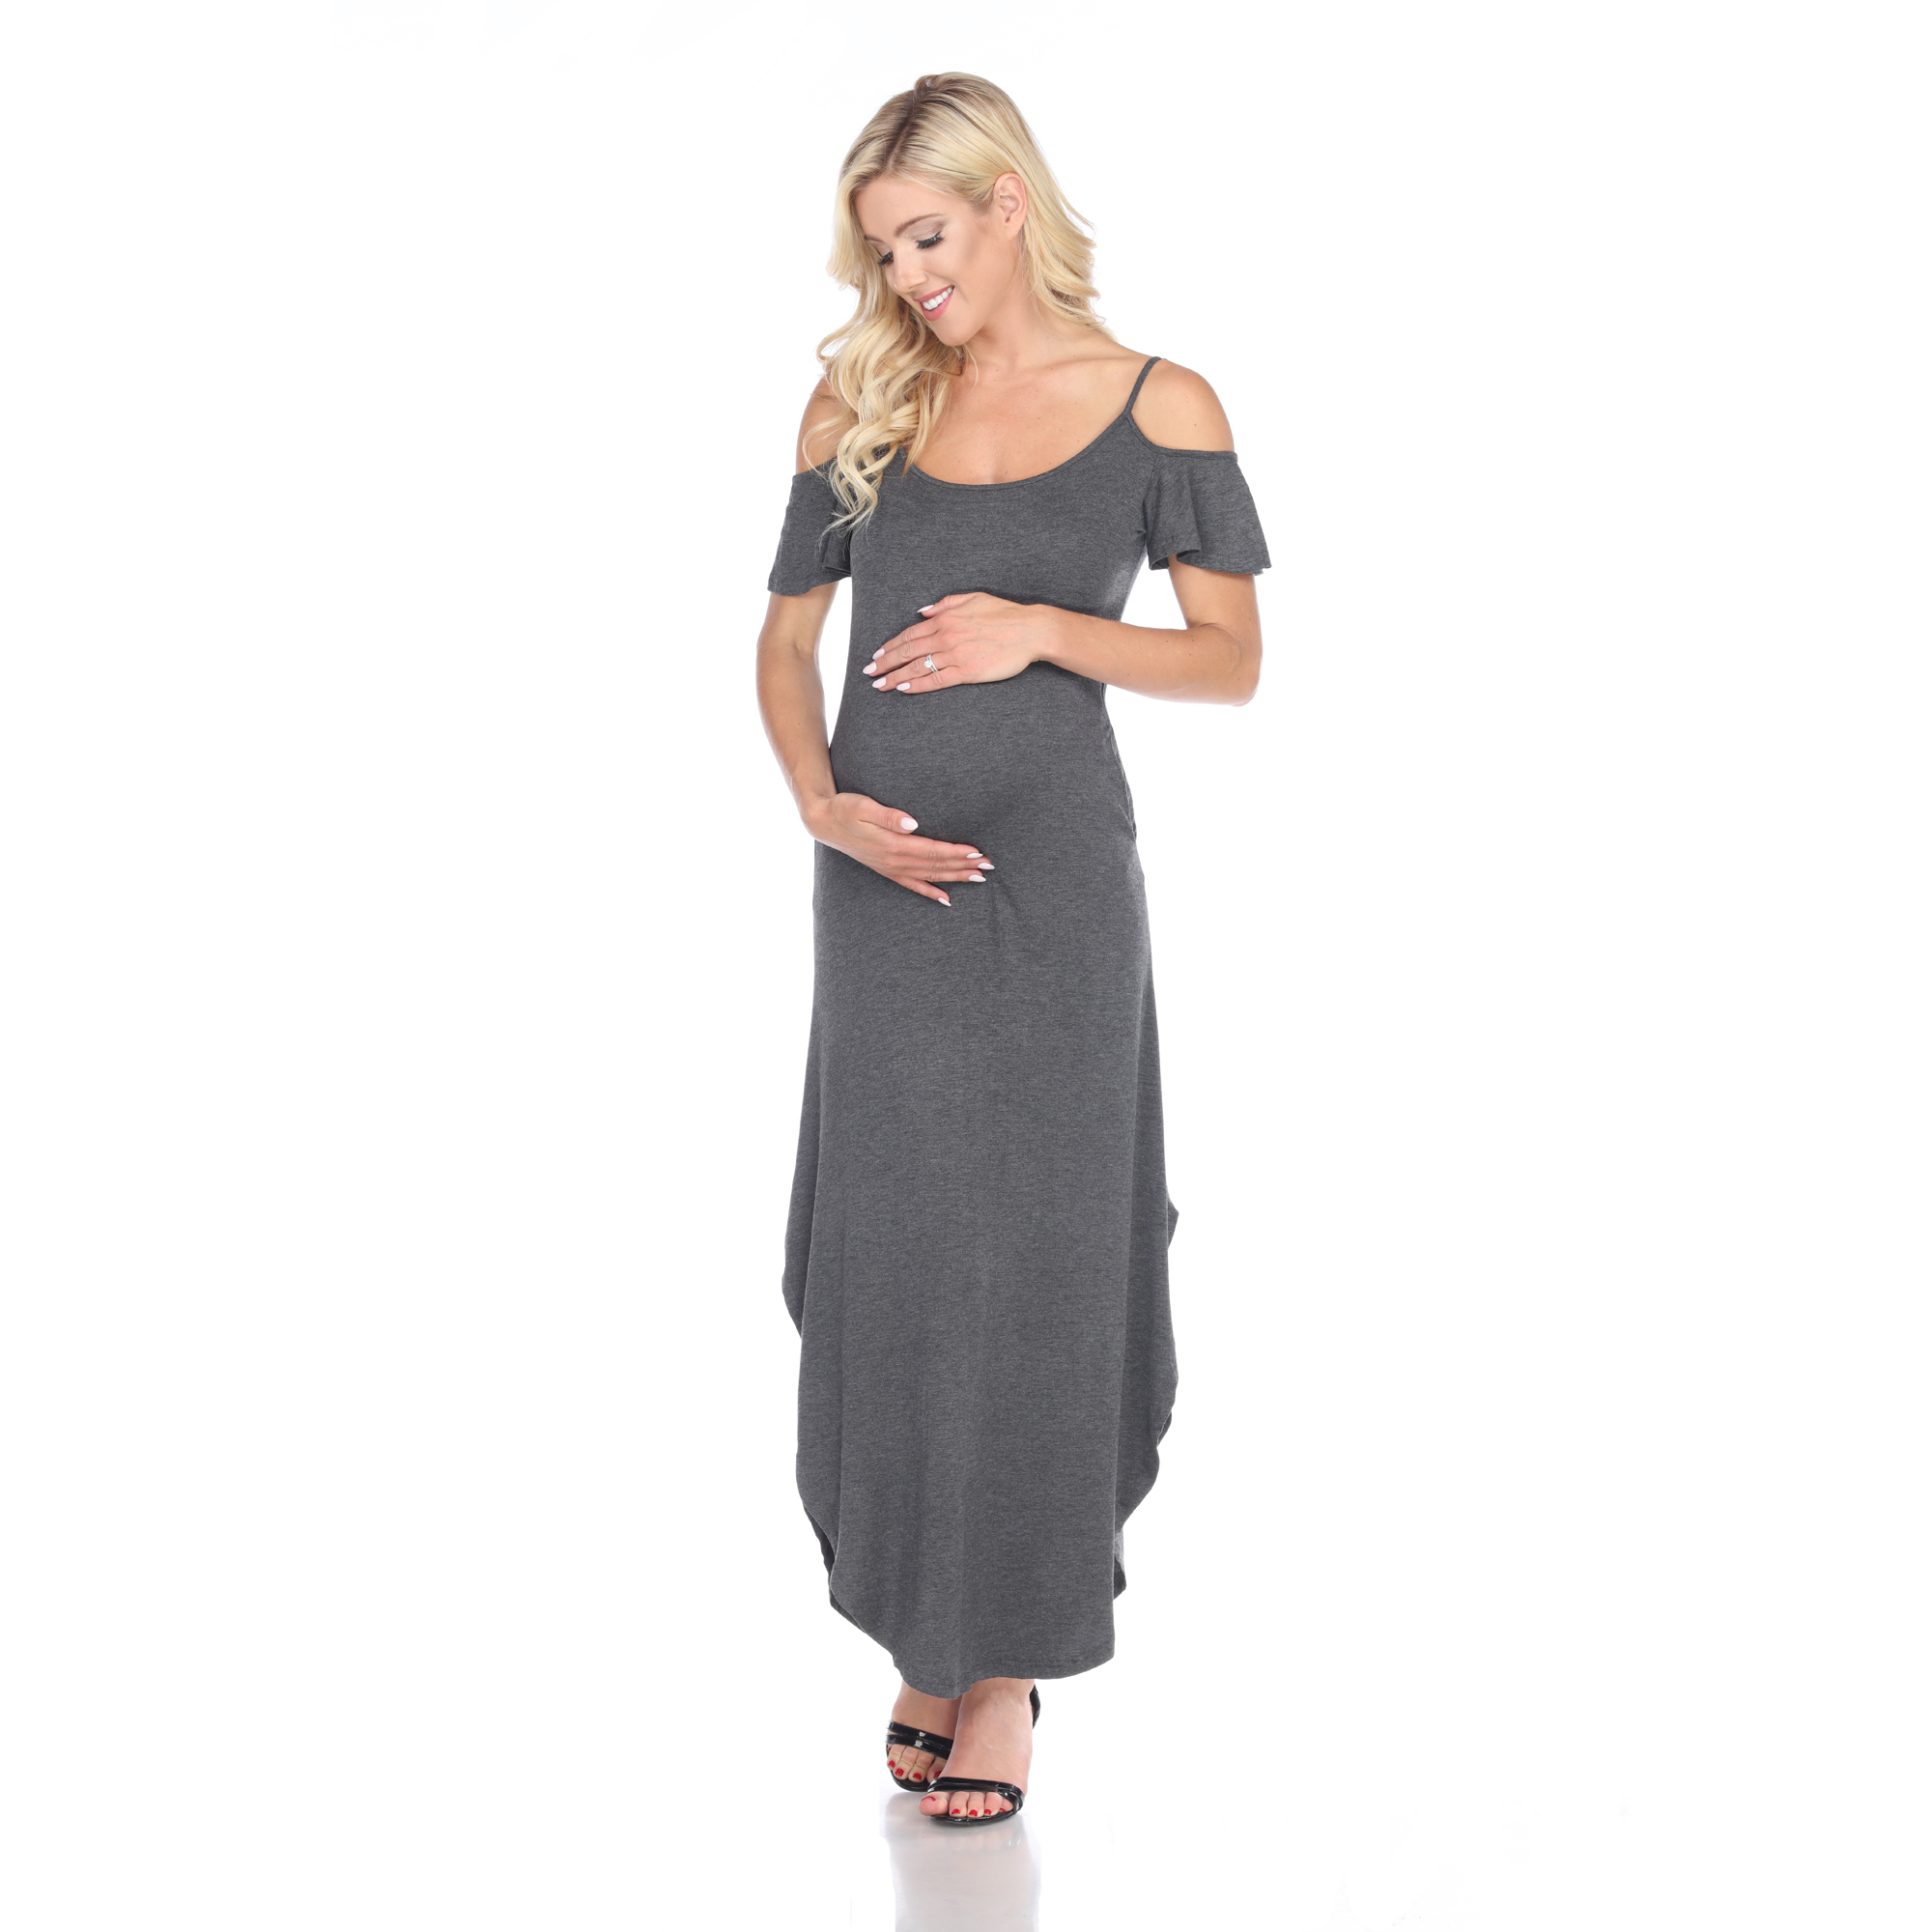 White Mark Women's Maternity Cold Shoulder Maxi Dress - Charcoal, Small